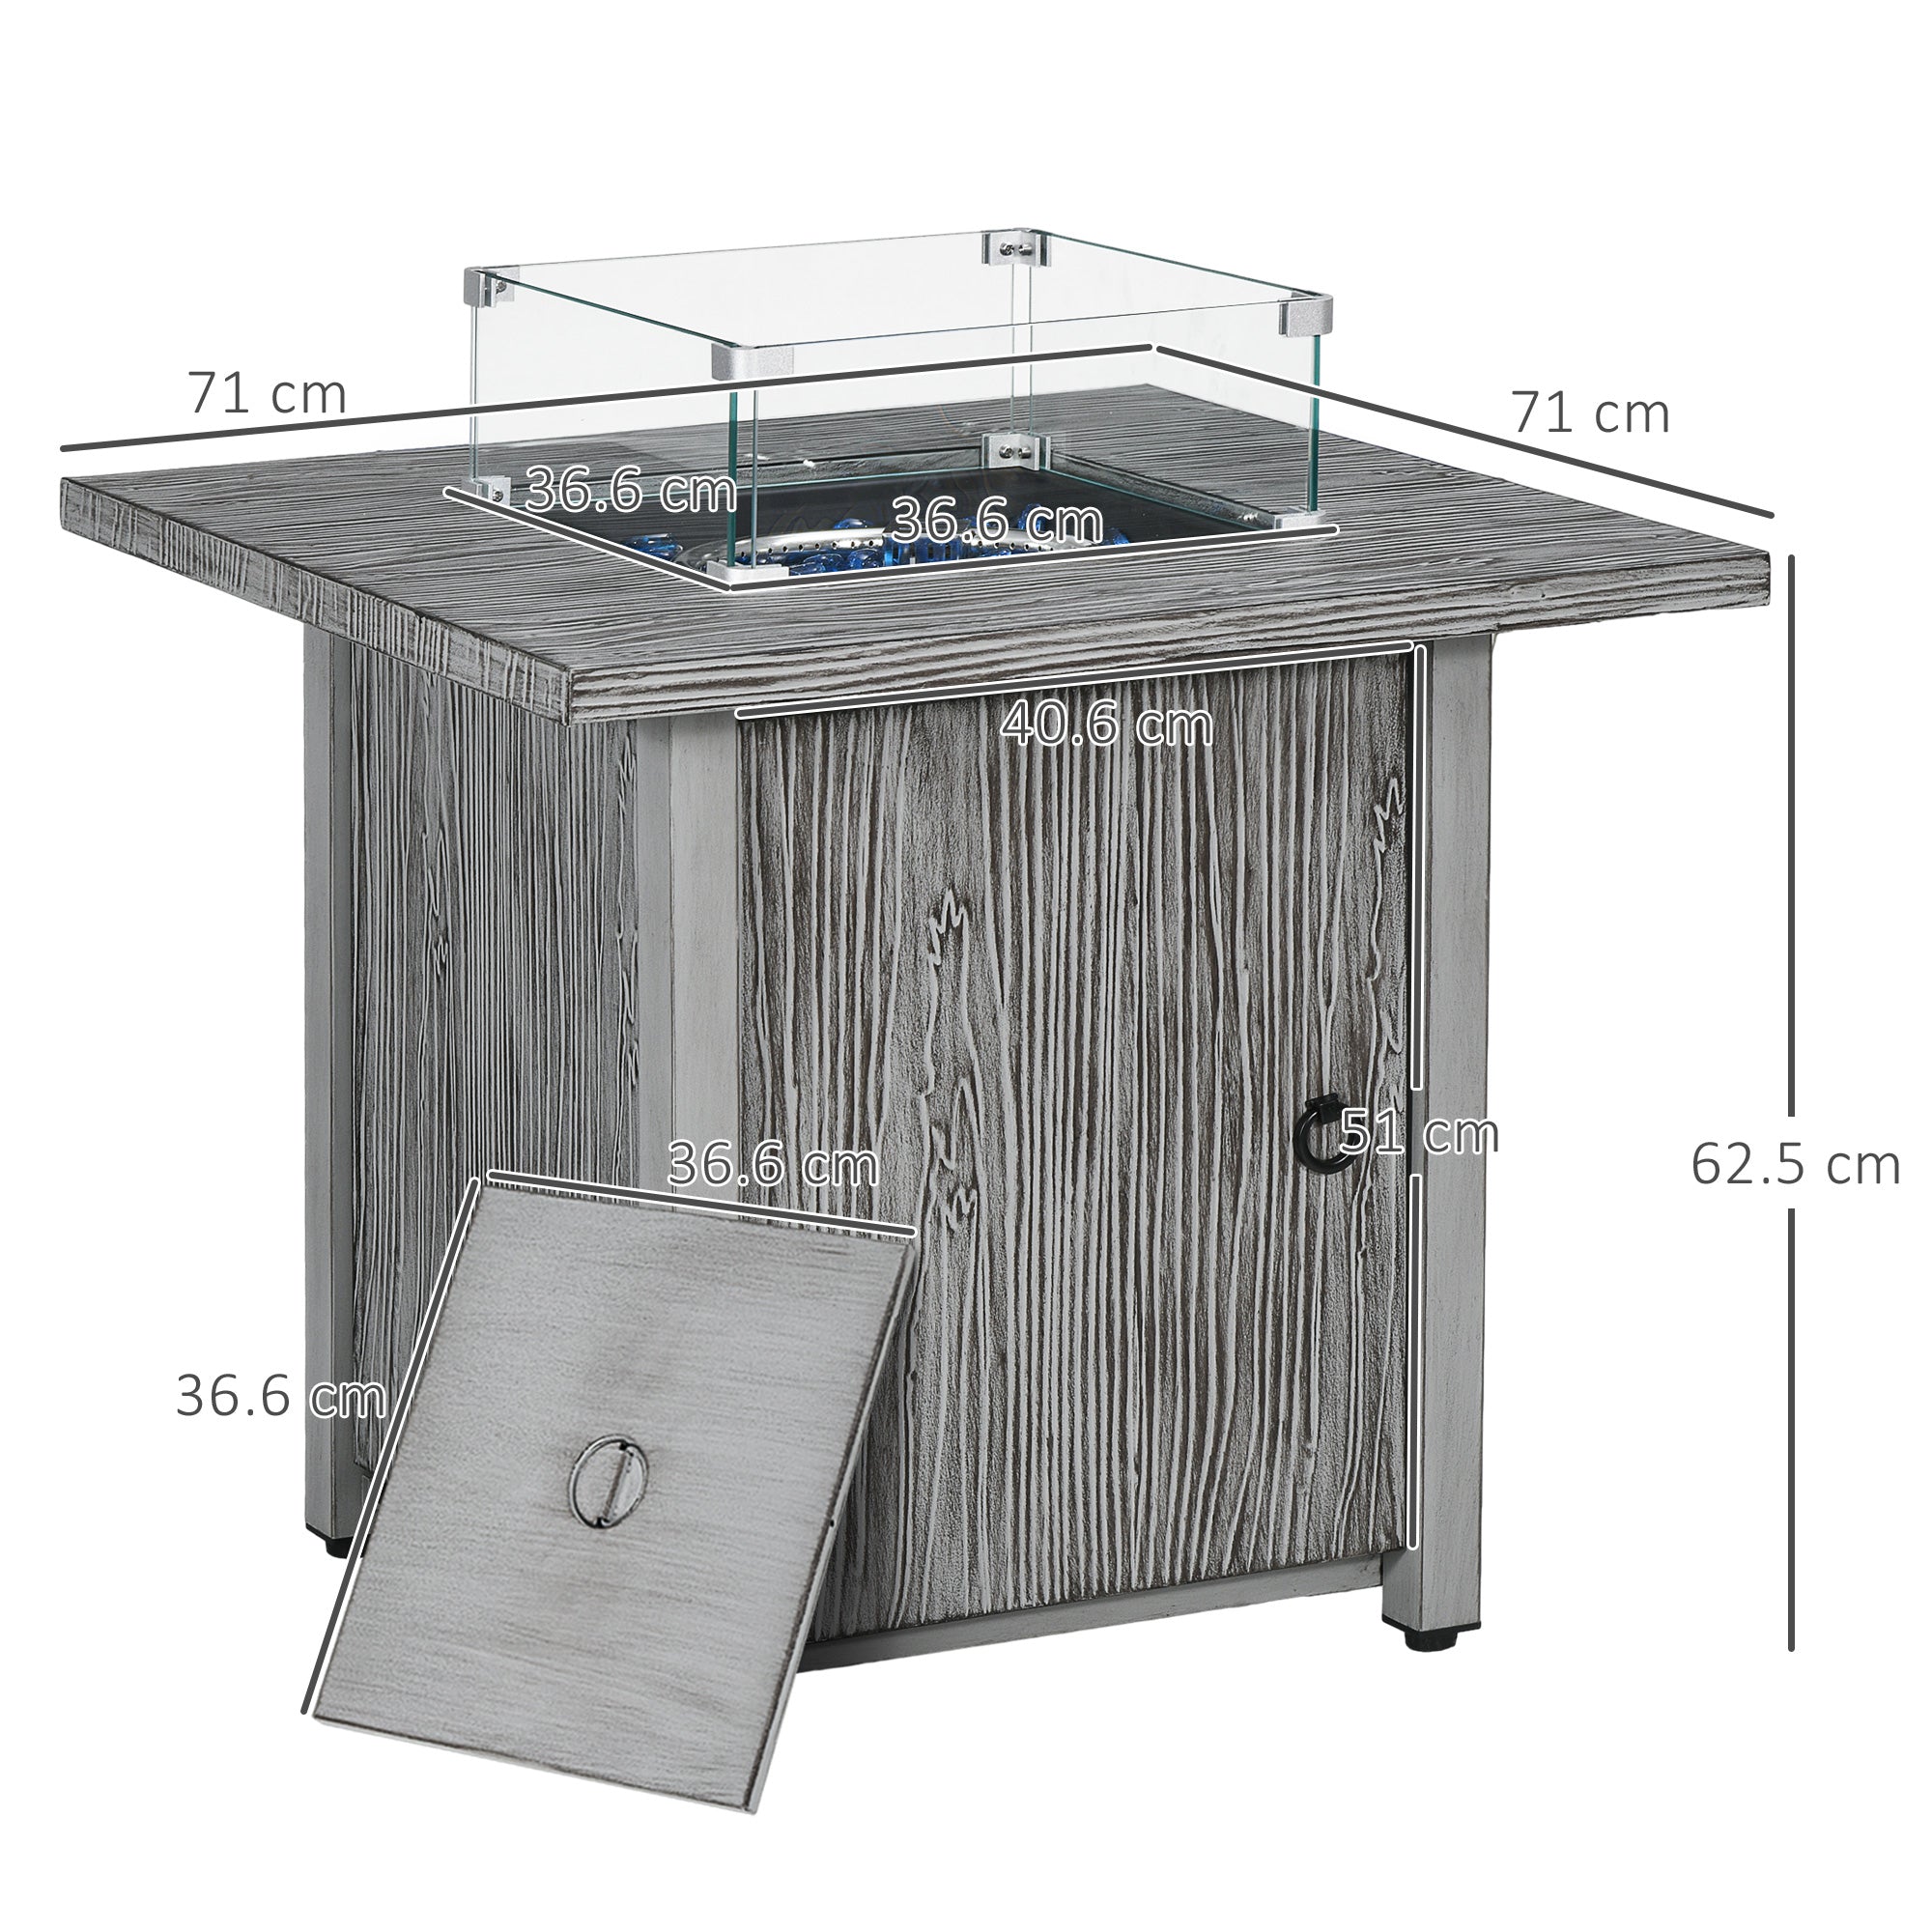 Outsunny 40,000 BTU Gas Fire Pit Table with Cover, Glass Screen and Glass Beads, Grey